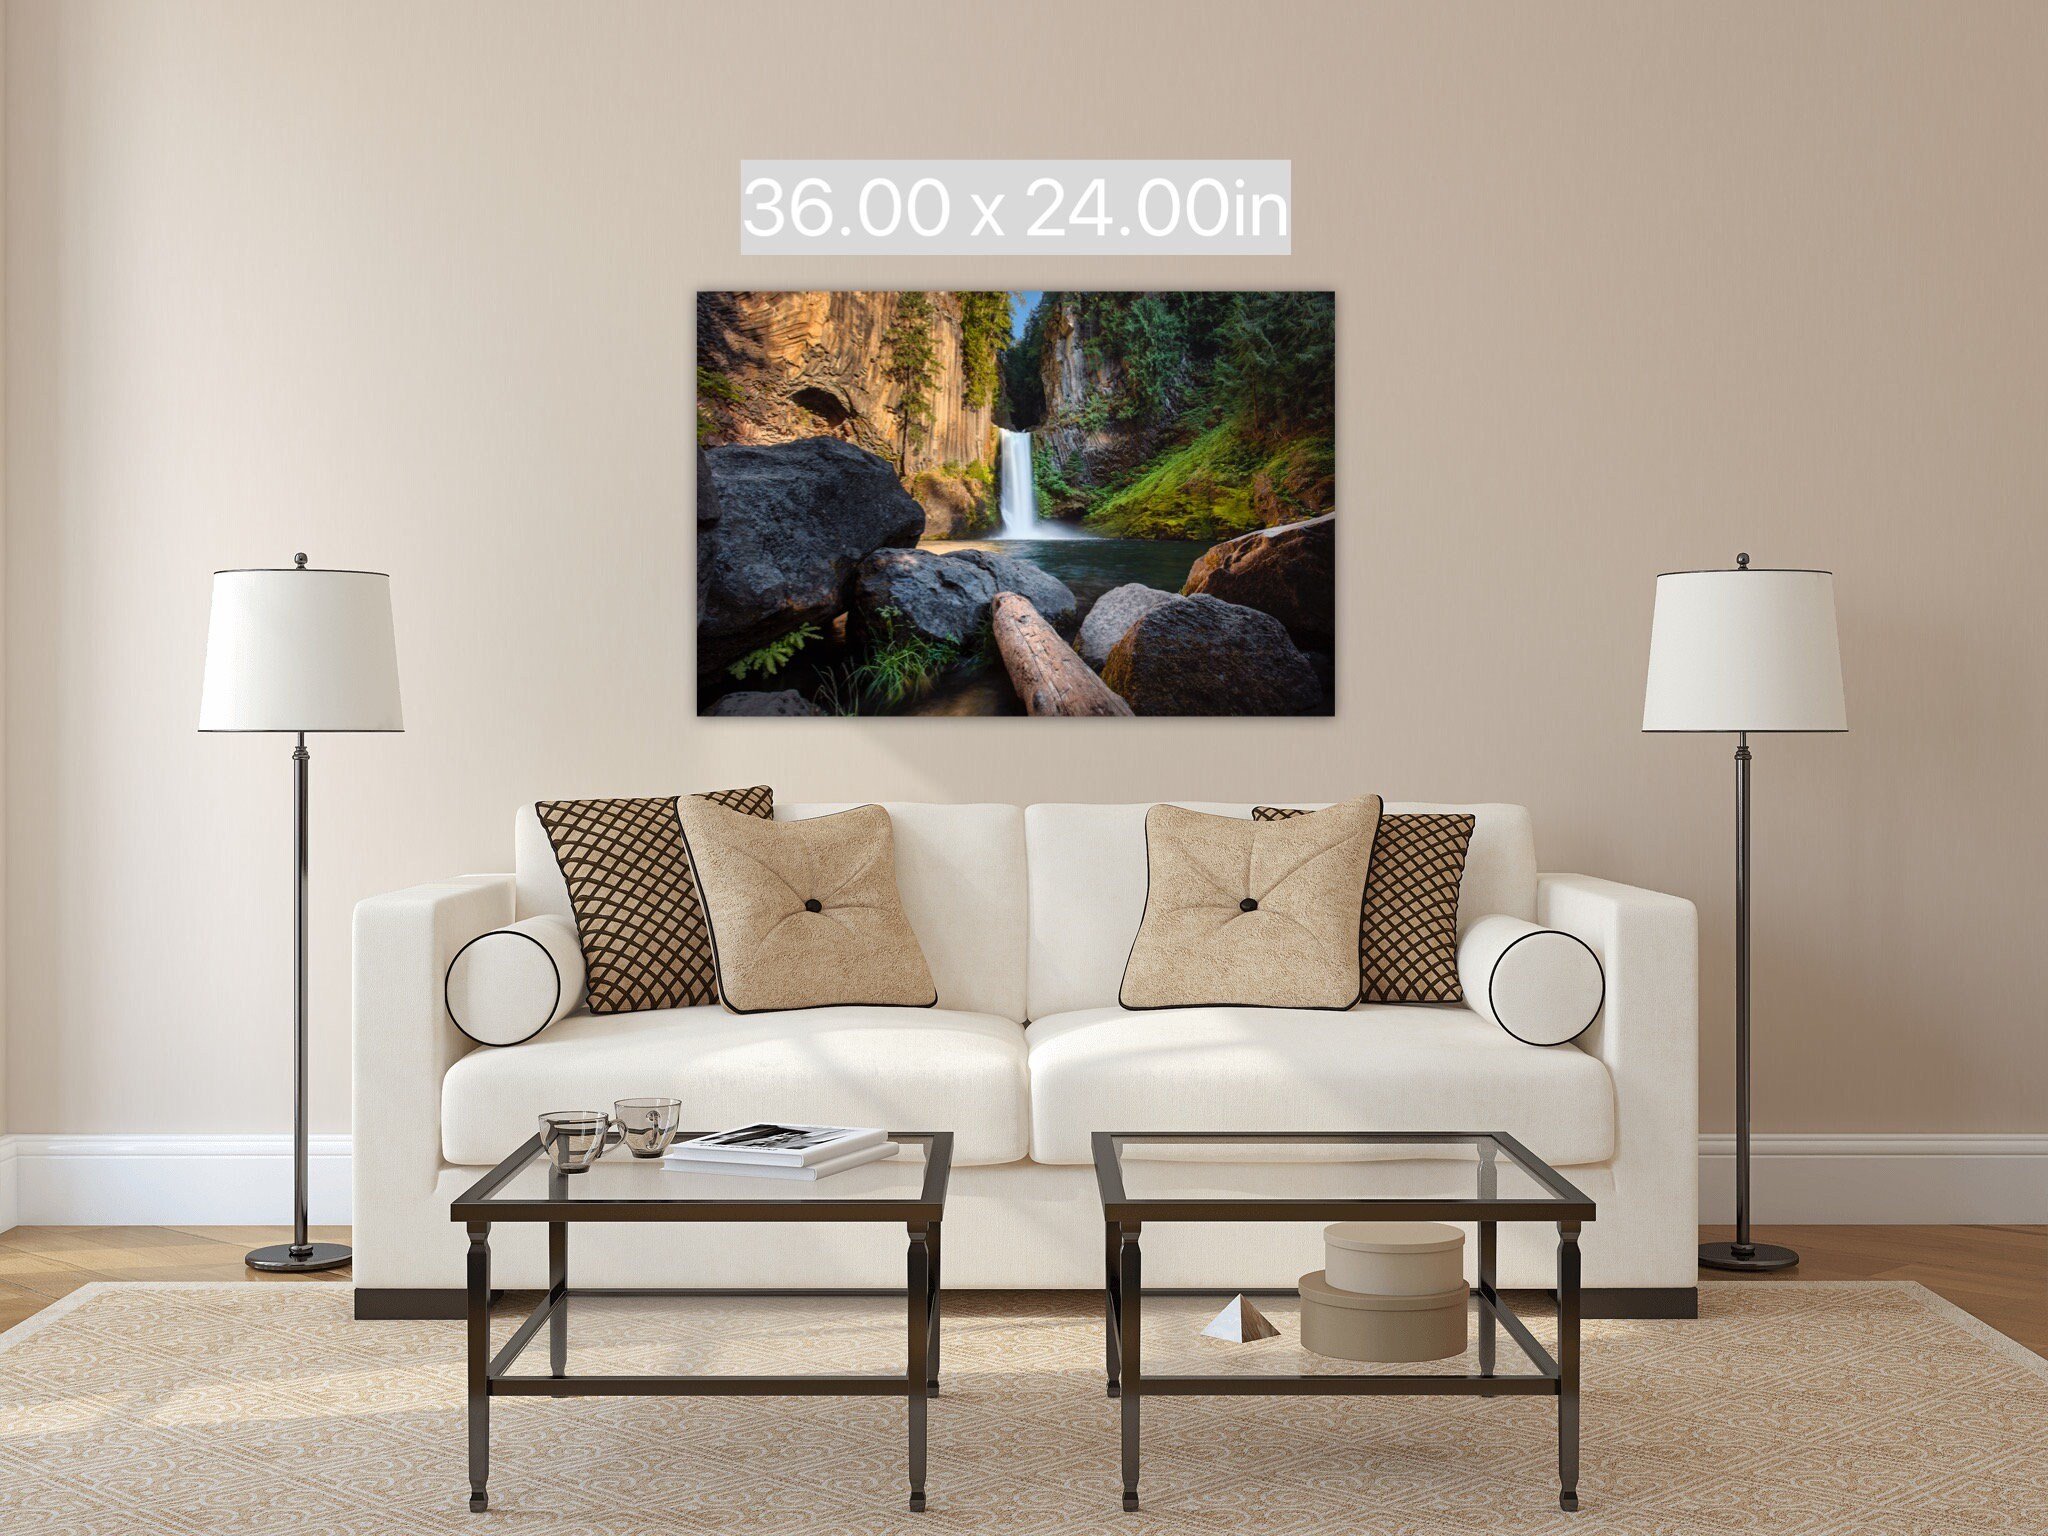 Wall Art Gallery Prints Nature Decor Artwork for Living Room Bedroom Office kitchen Home Lustre Photos Metallic Print or Canvas Pictures Decorations Toketee Falls Oregon Waterfall Landscape Photo 